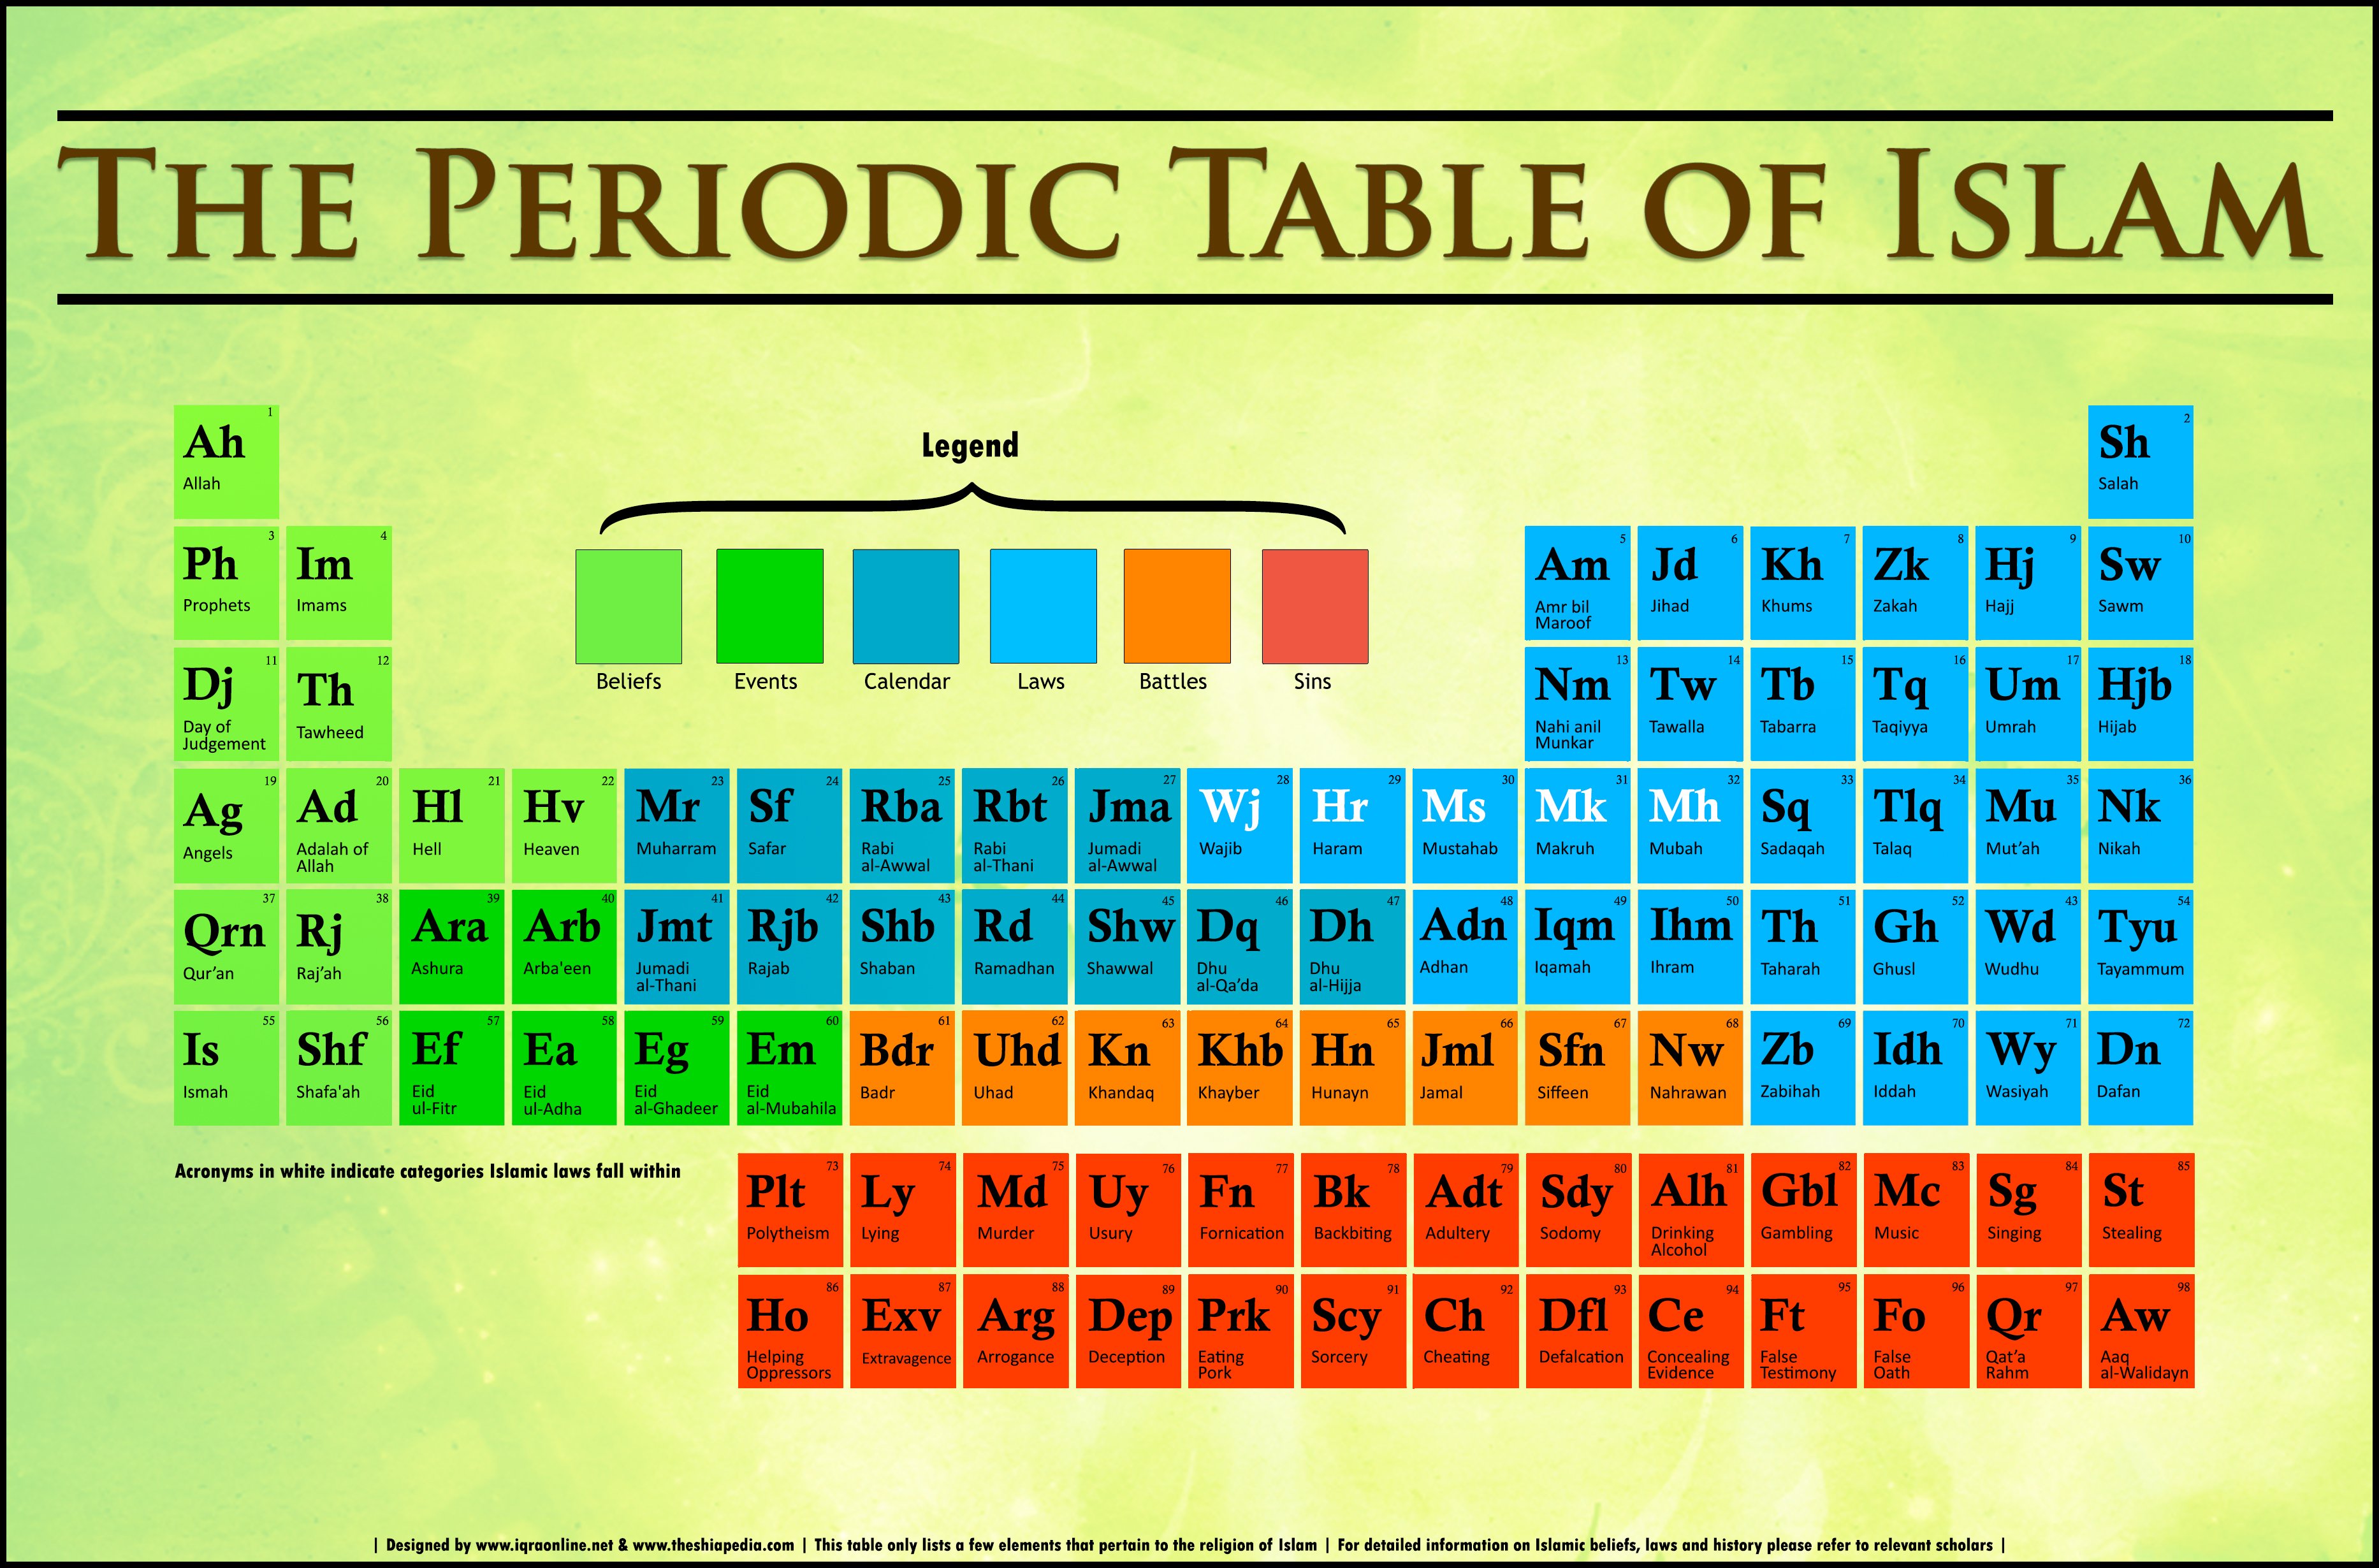 The periodic table of islam